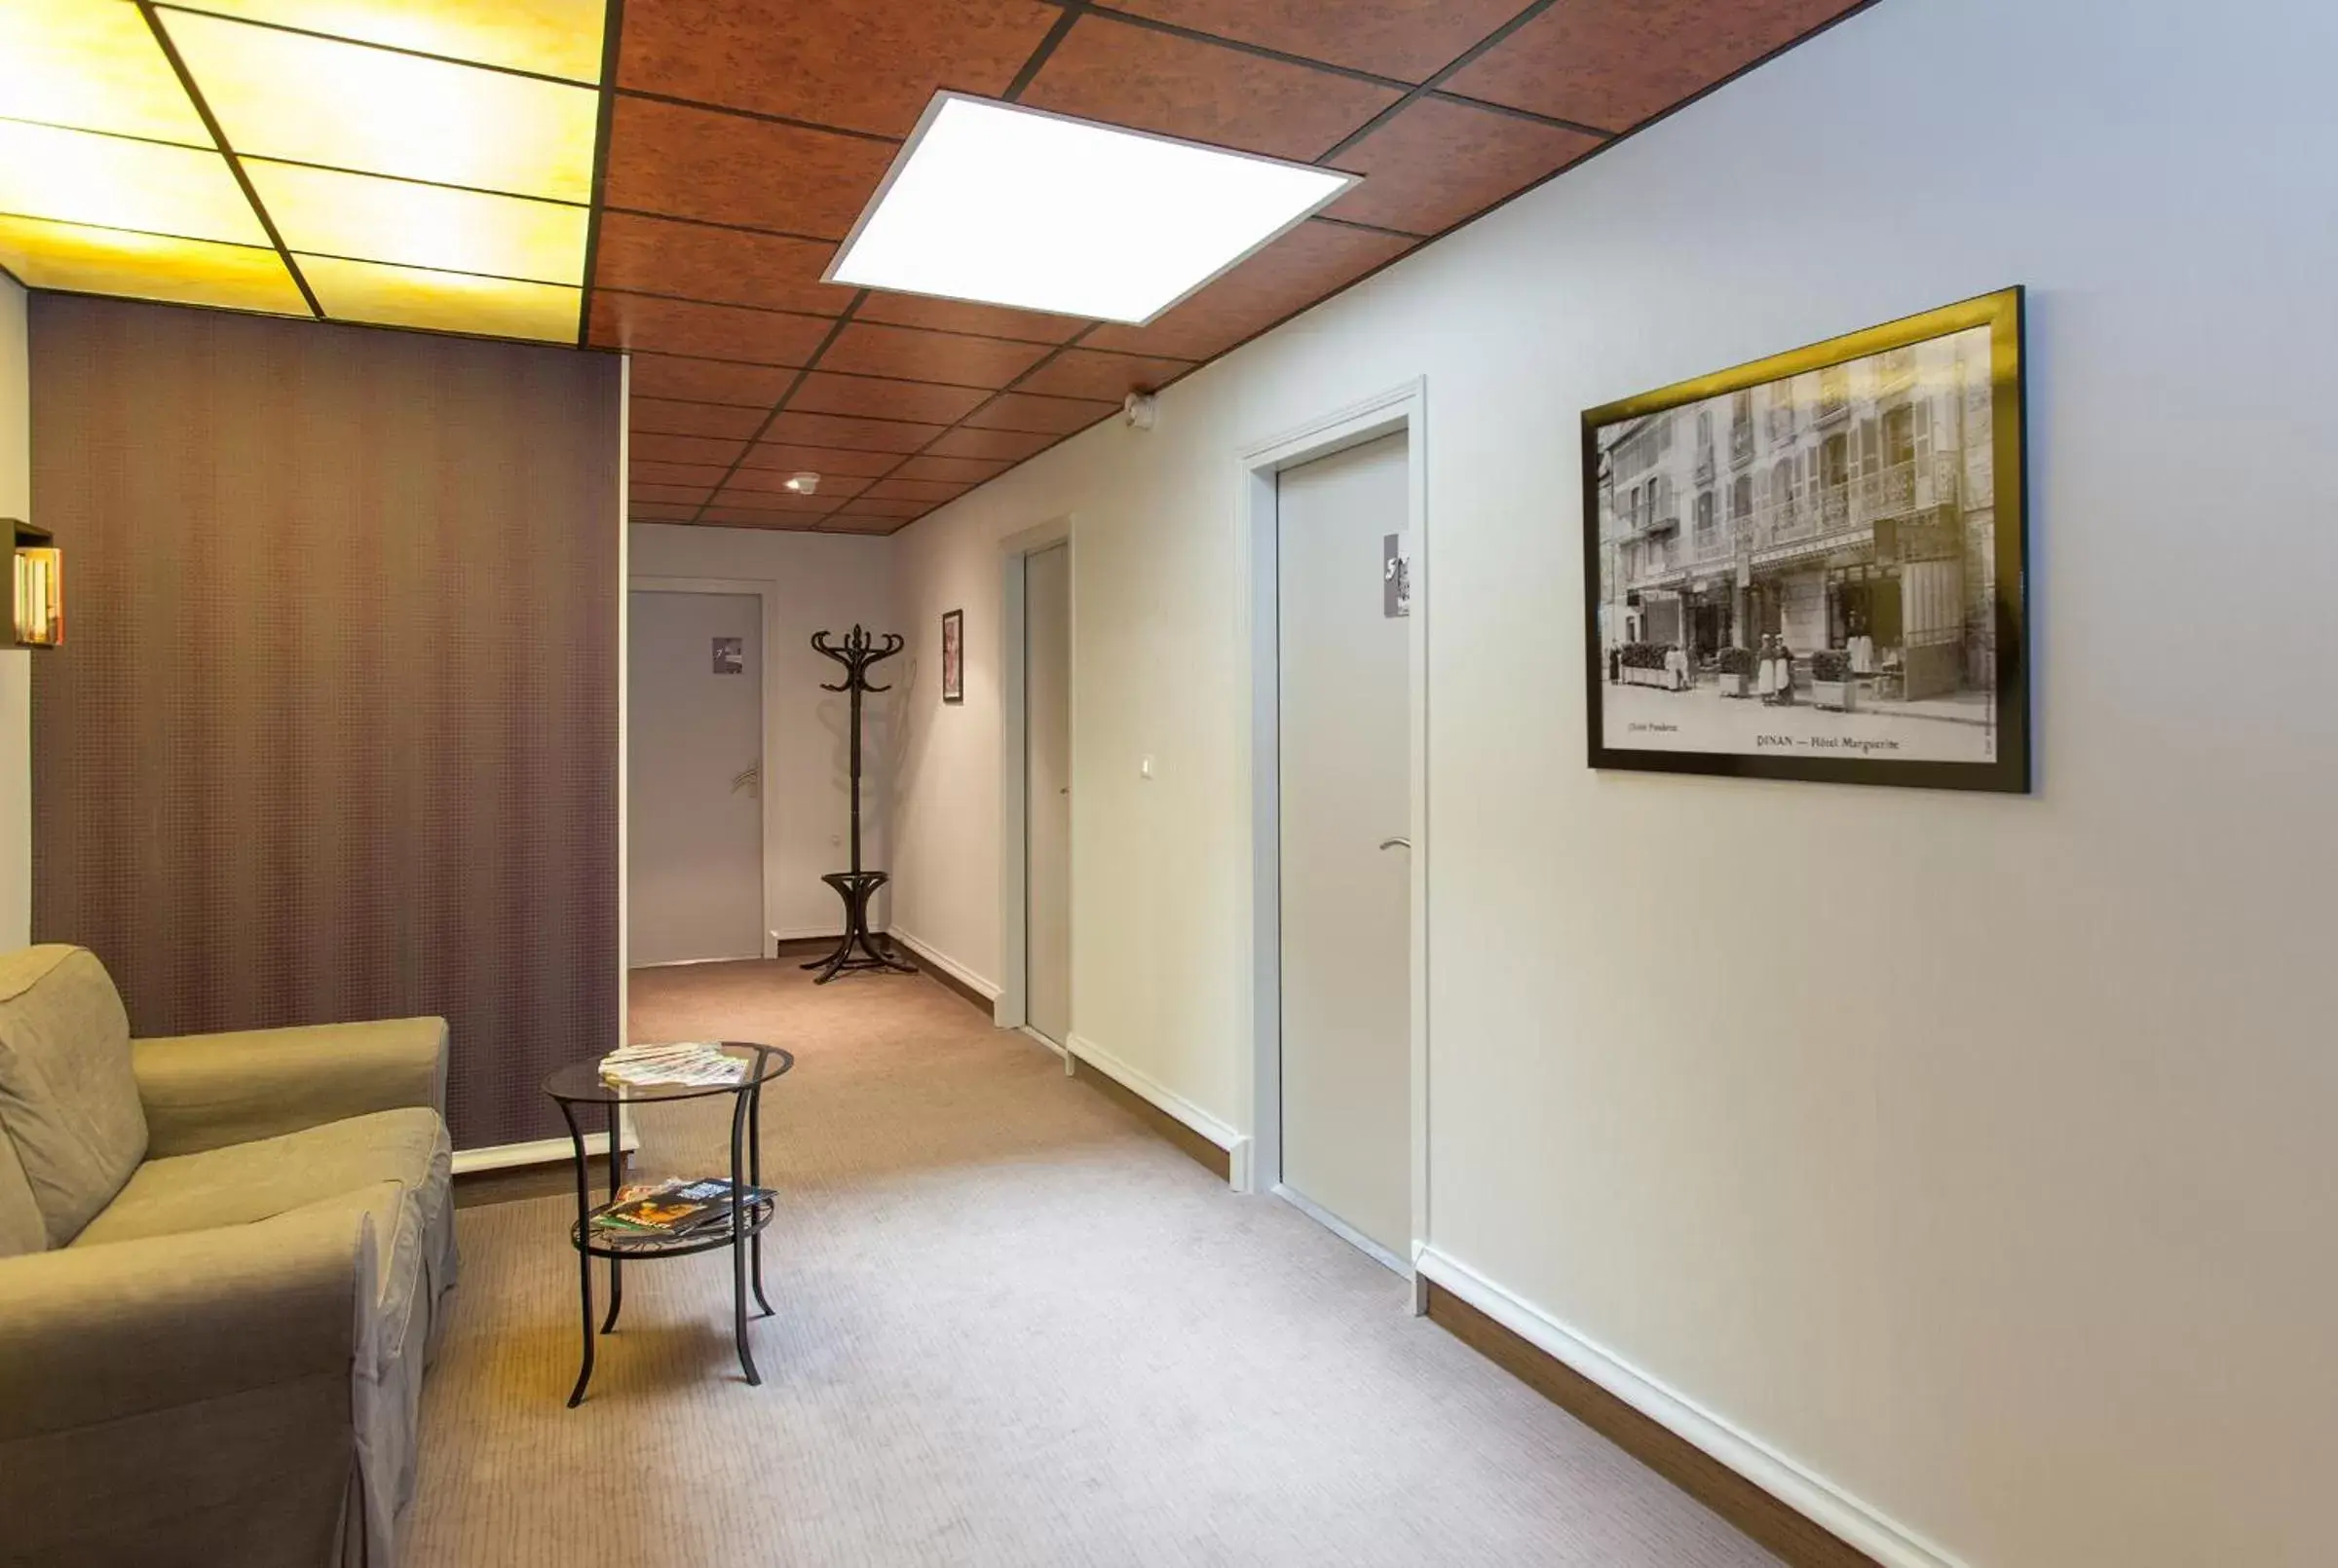 Area and facilities in Cit'Hotel le Challonge